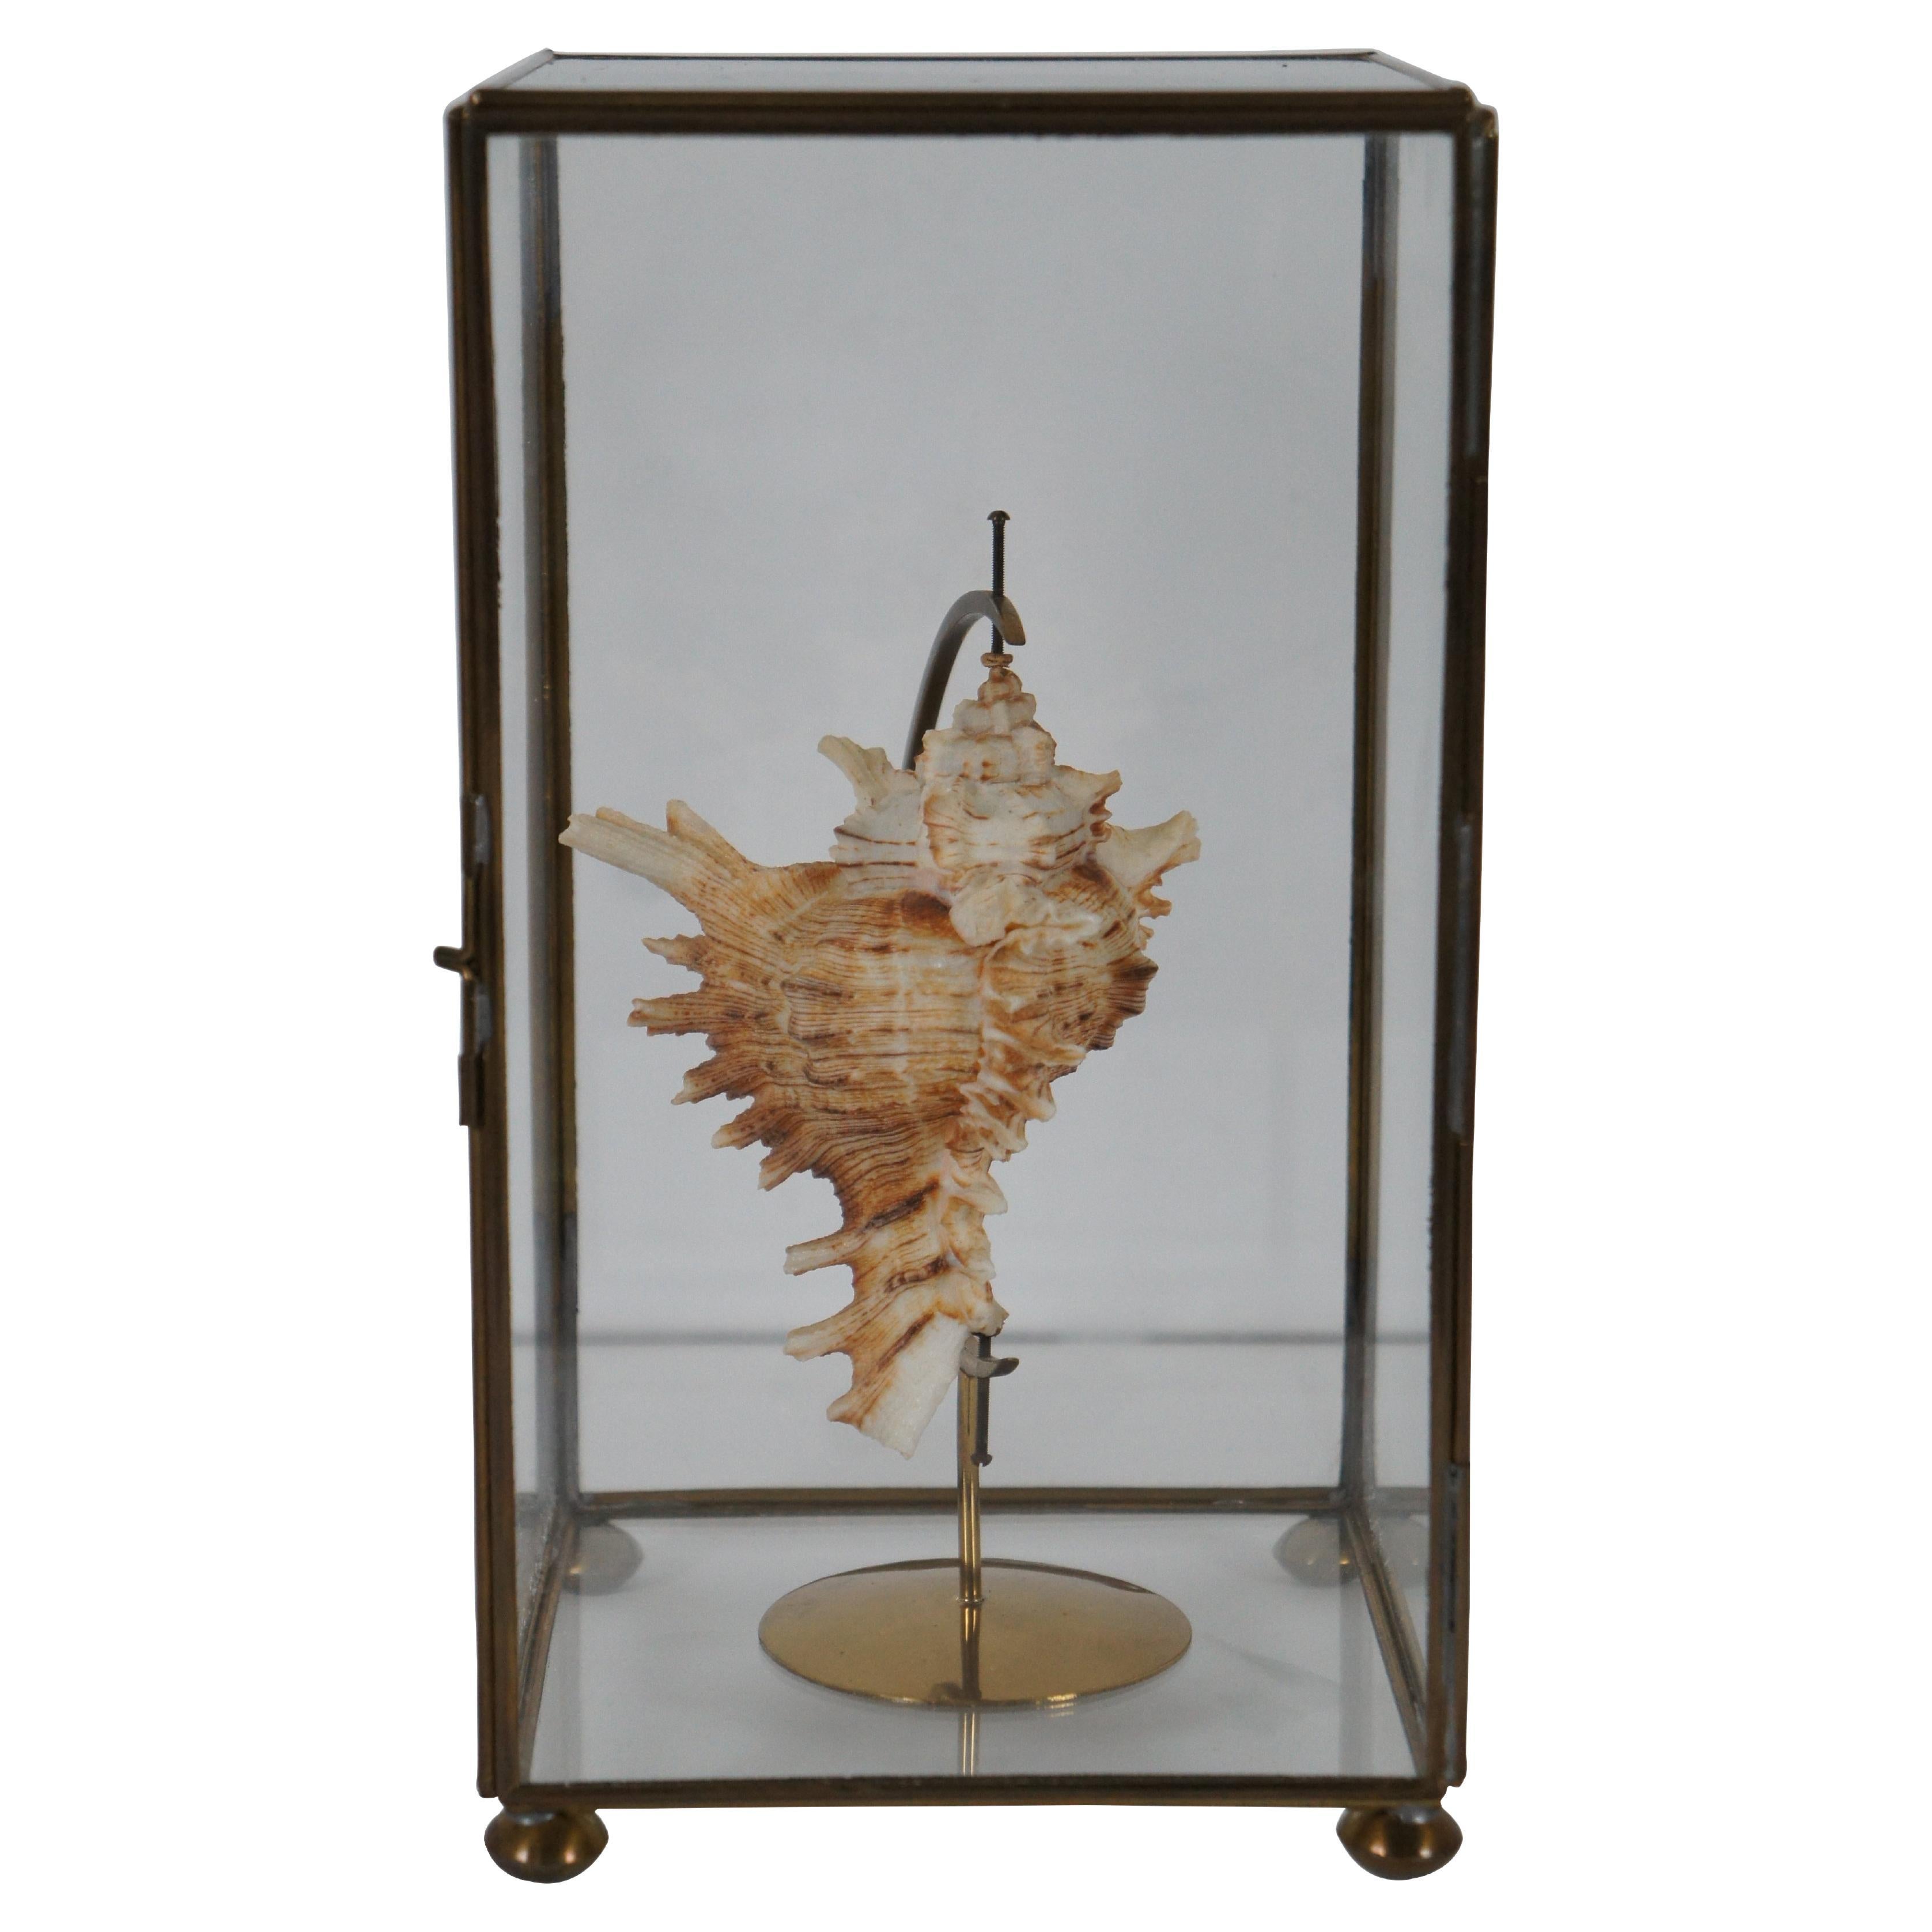 Vintage Spiked Conch Shell Brass Stand Glass Showcase Curio Casket Display 9"" (en anglais)